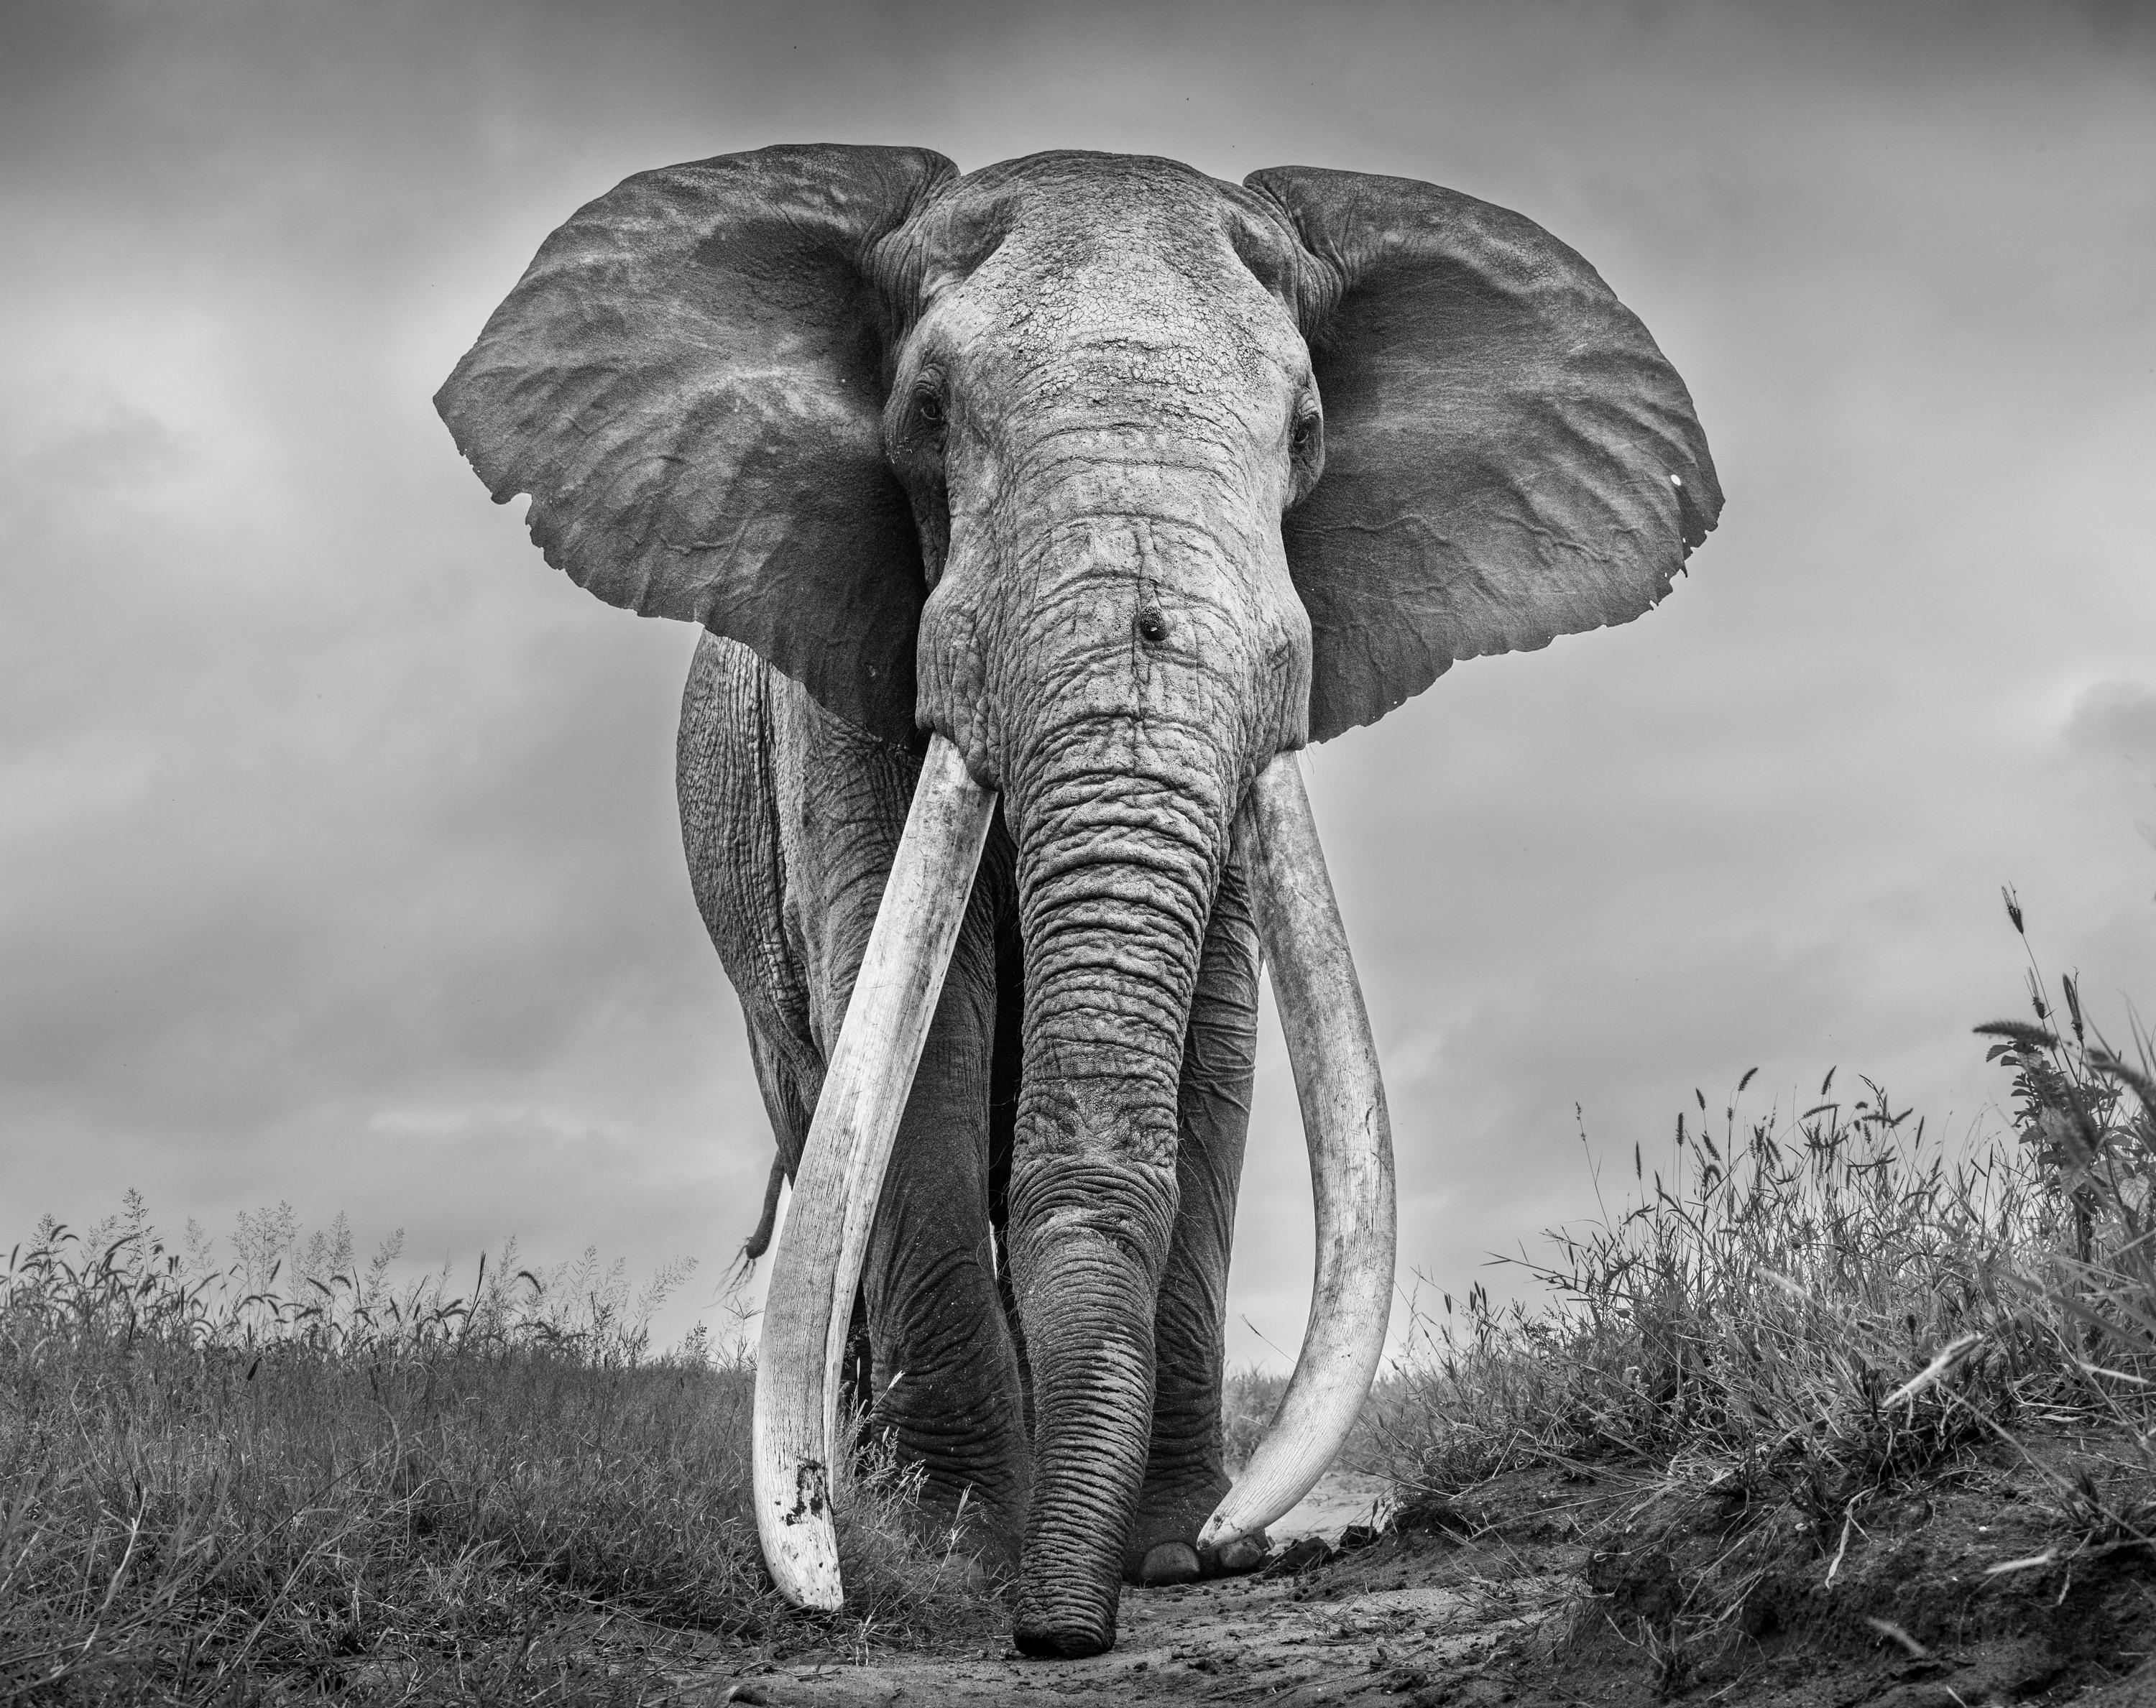 "It took four years to make this portrait, with several failed attempts between 2017 and 2021. Lugard was perhaps the most outstanding living tusker in Africa, so a portrait would need to serve him justice without compromise. 

From the moment I